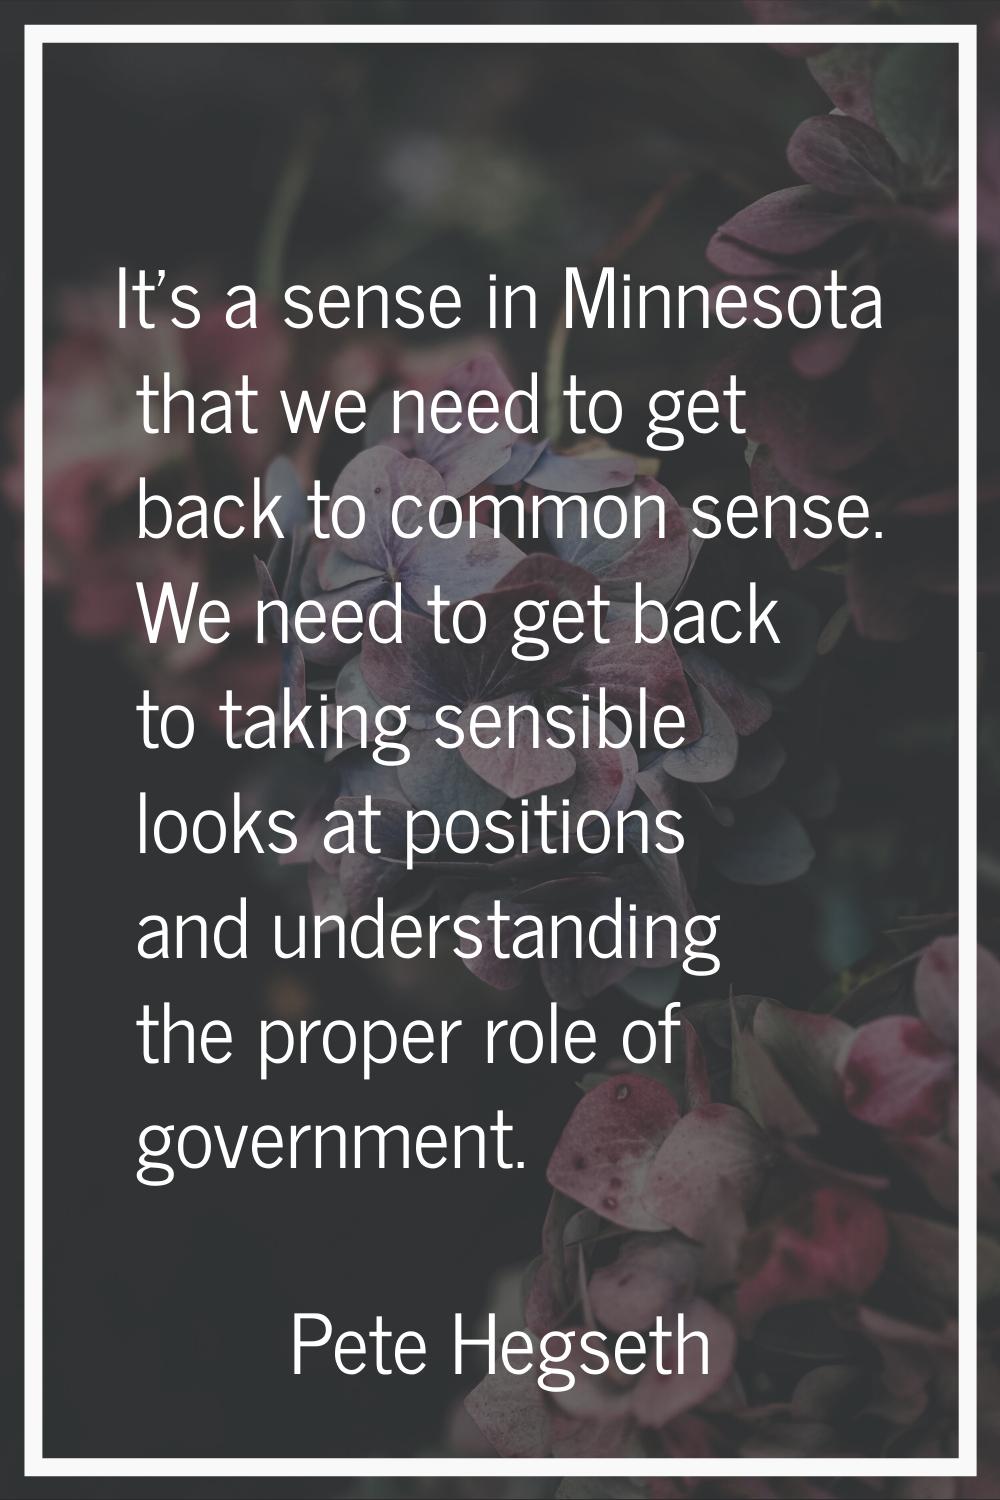 It's a sense in Minnesota that we need to get back to common sense. We need to get back to taking s